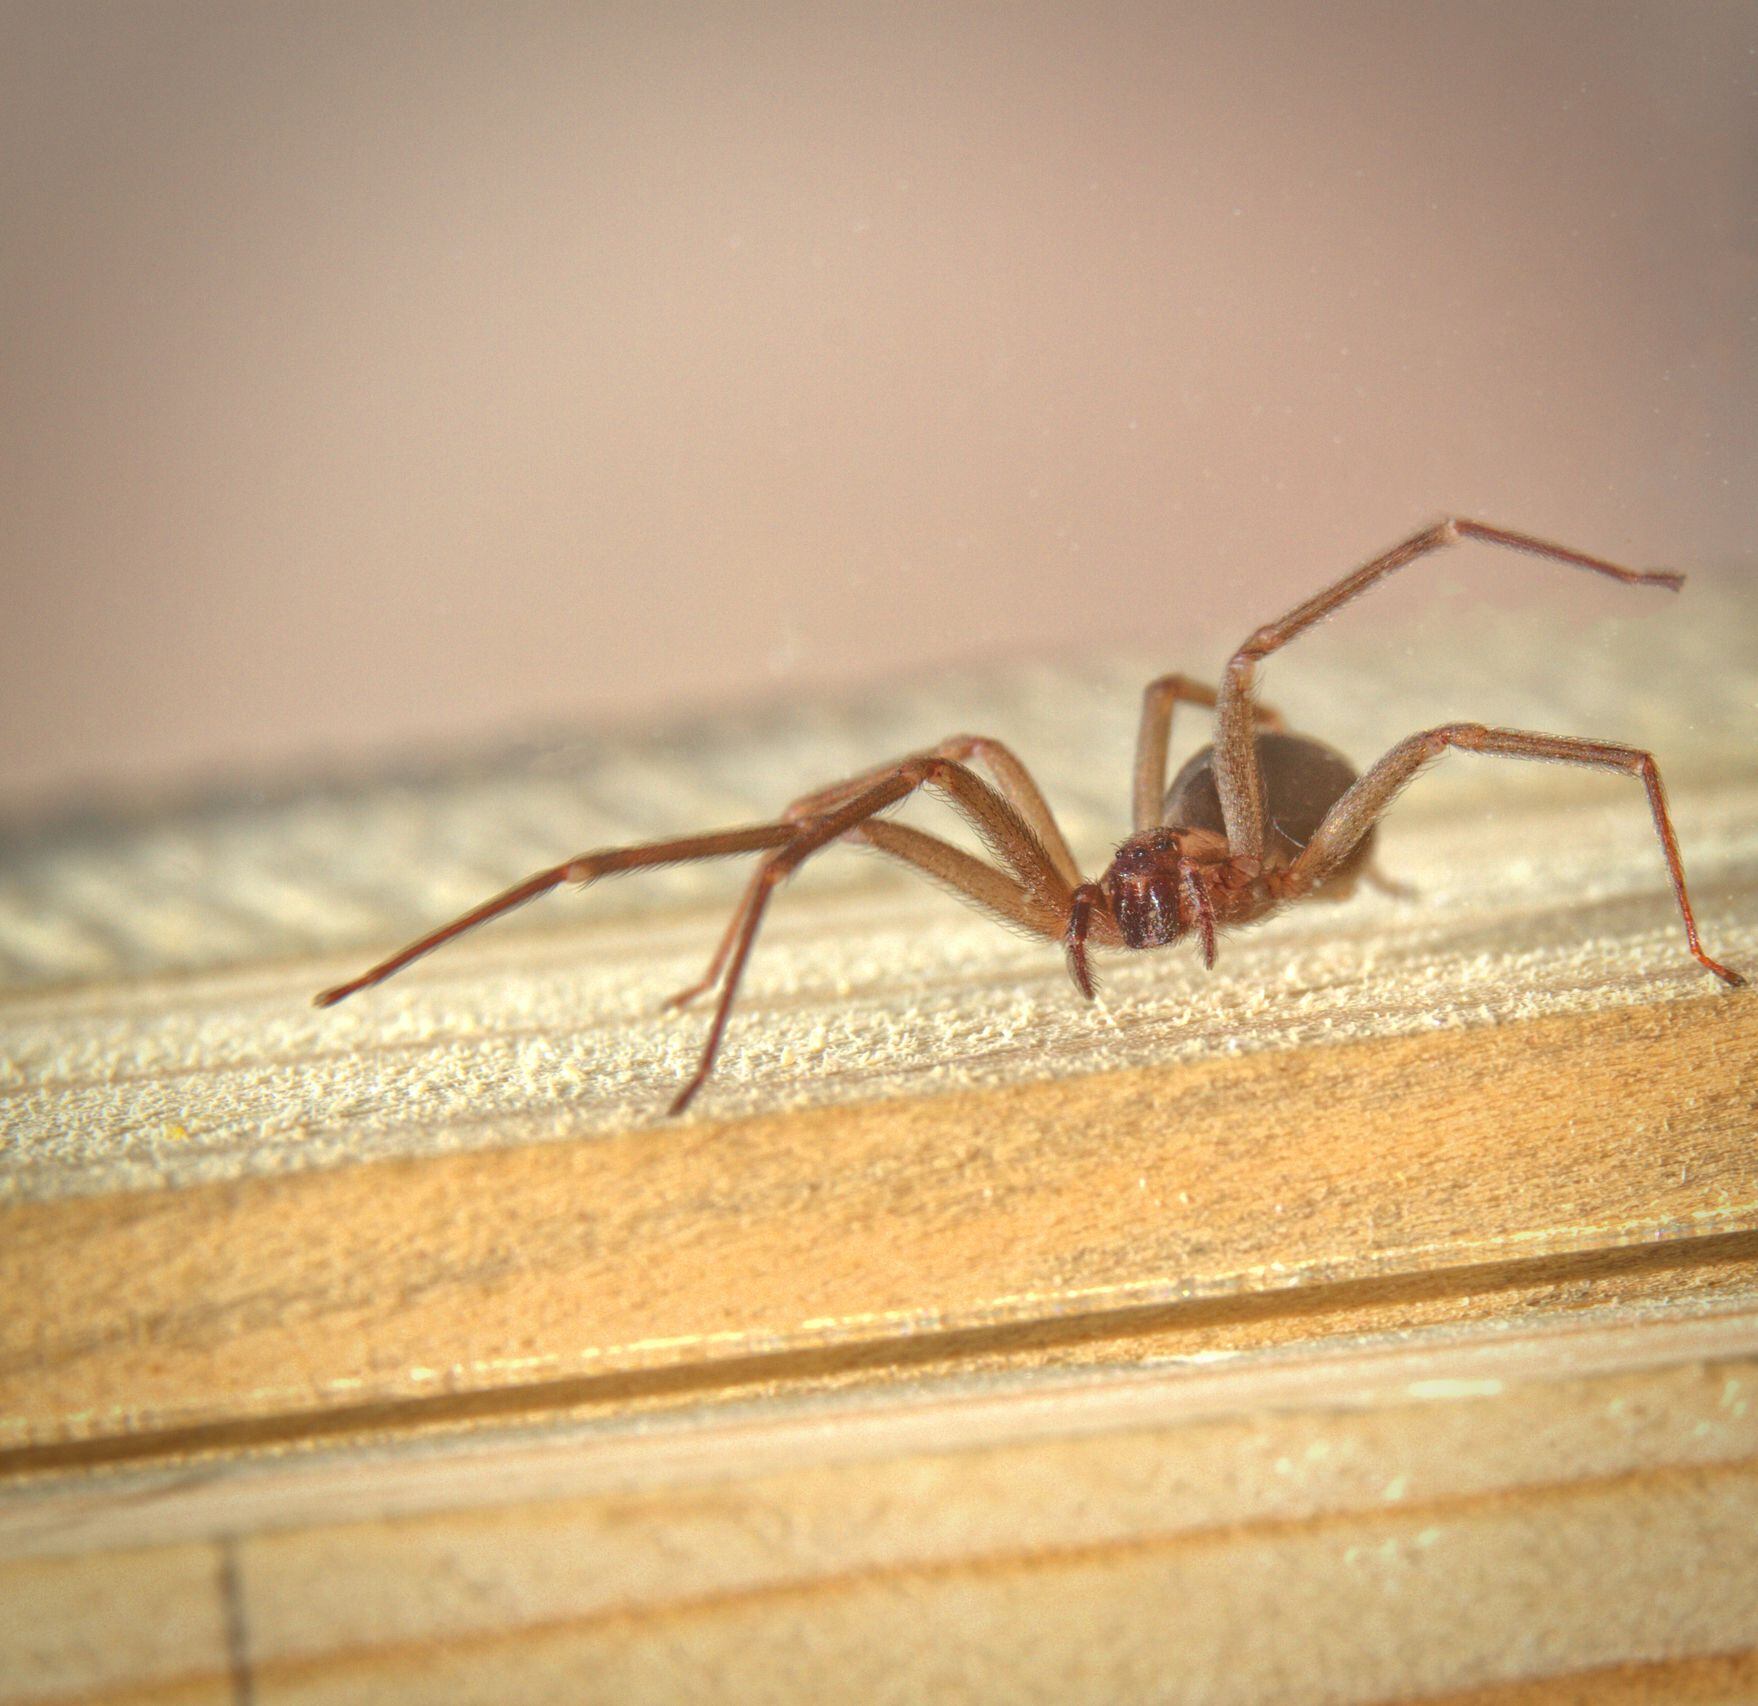 3 Venomous Spiders to Keep Out of Your Home in Spokane, WA